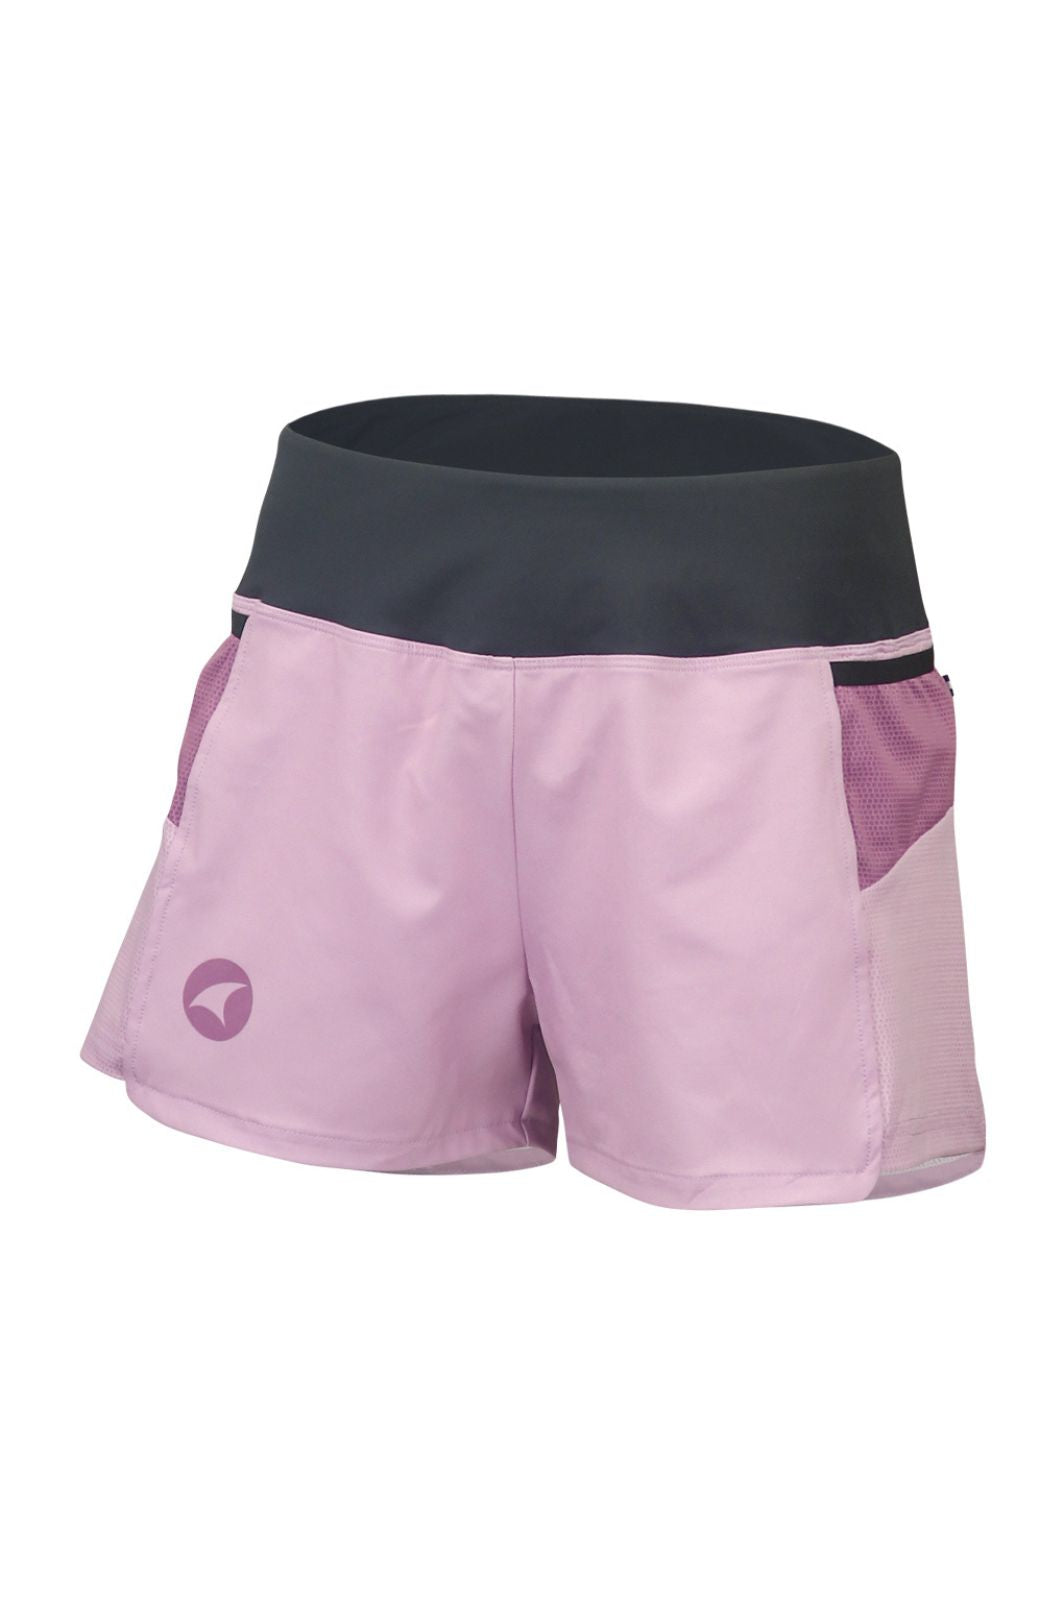 Women's Lilac Running Shorts - Front